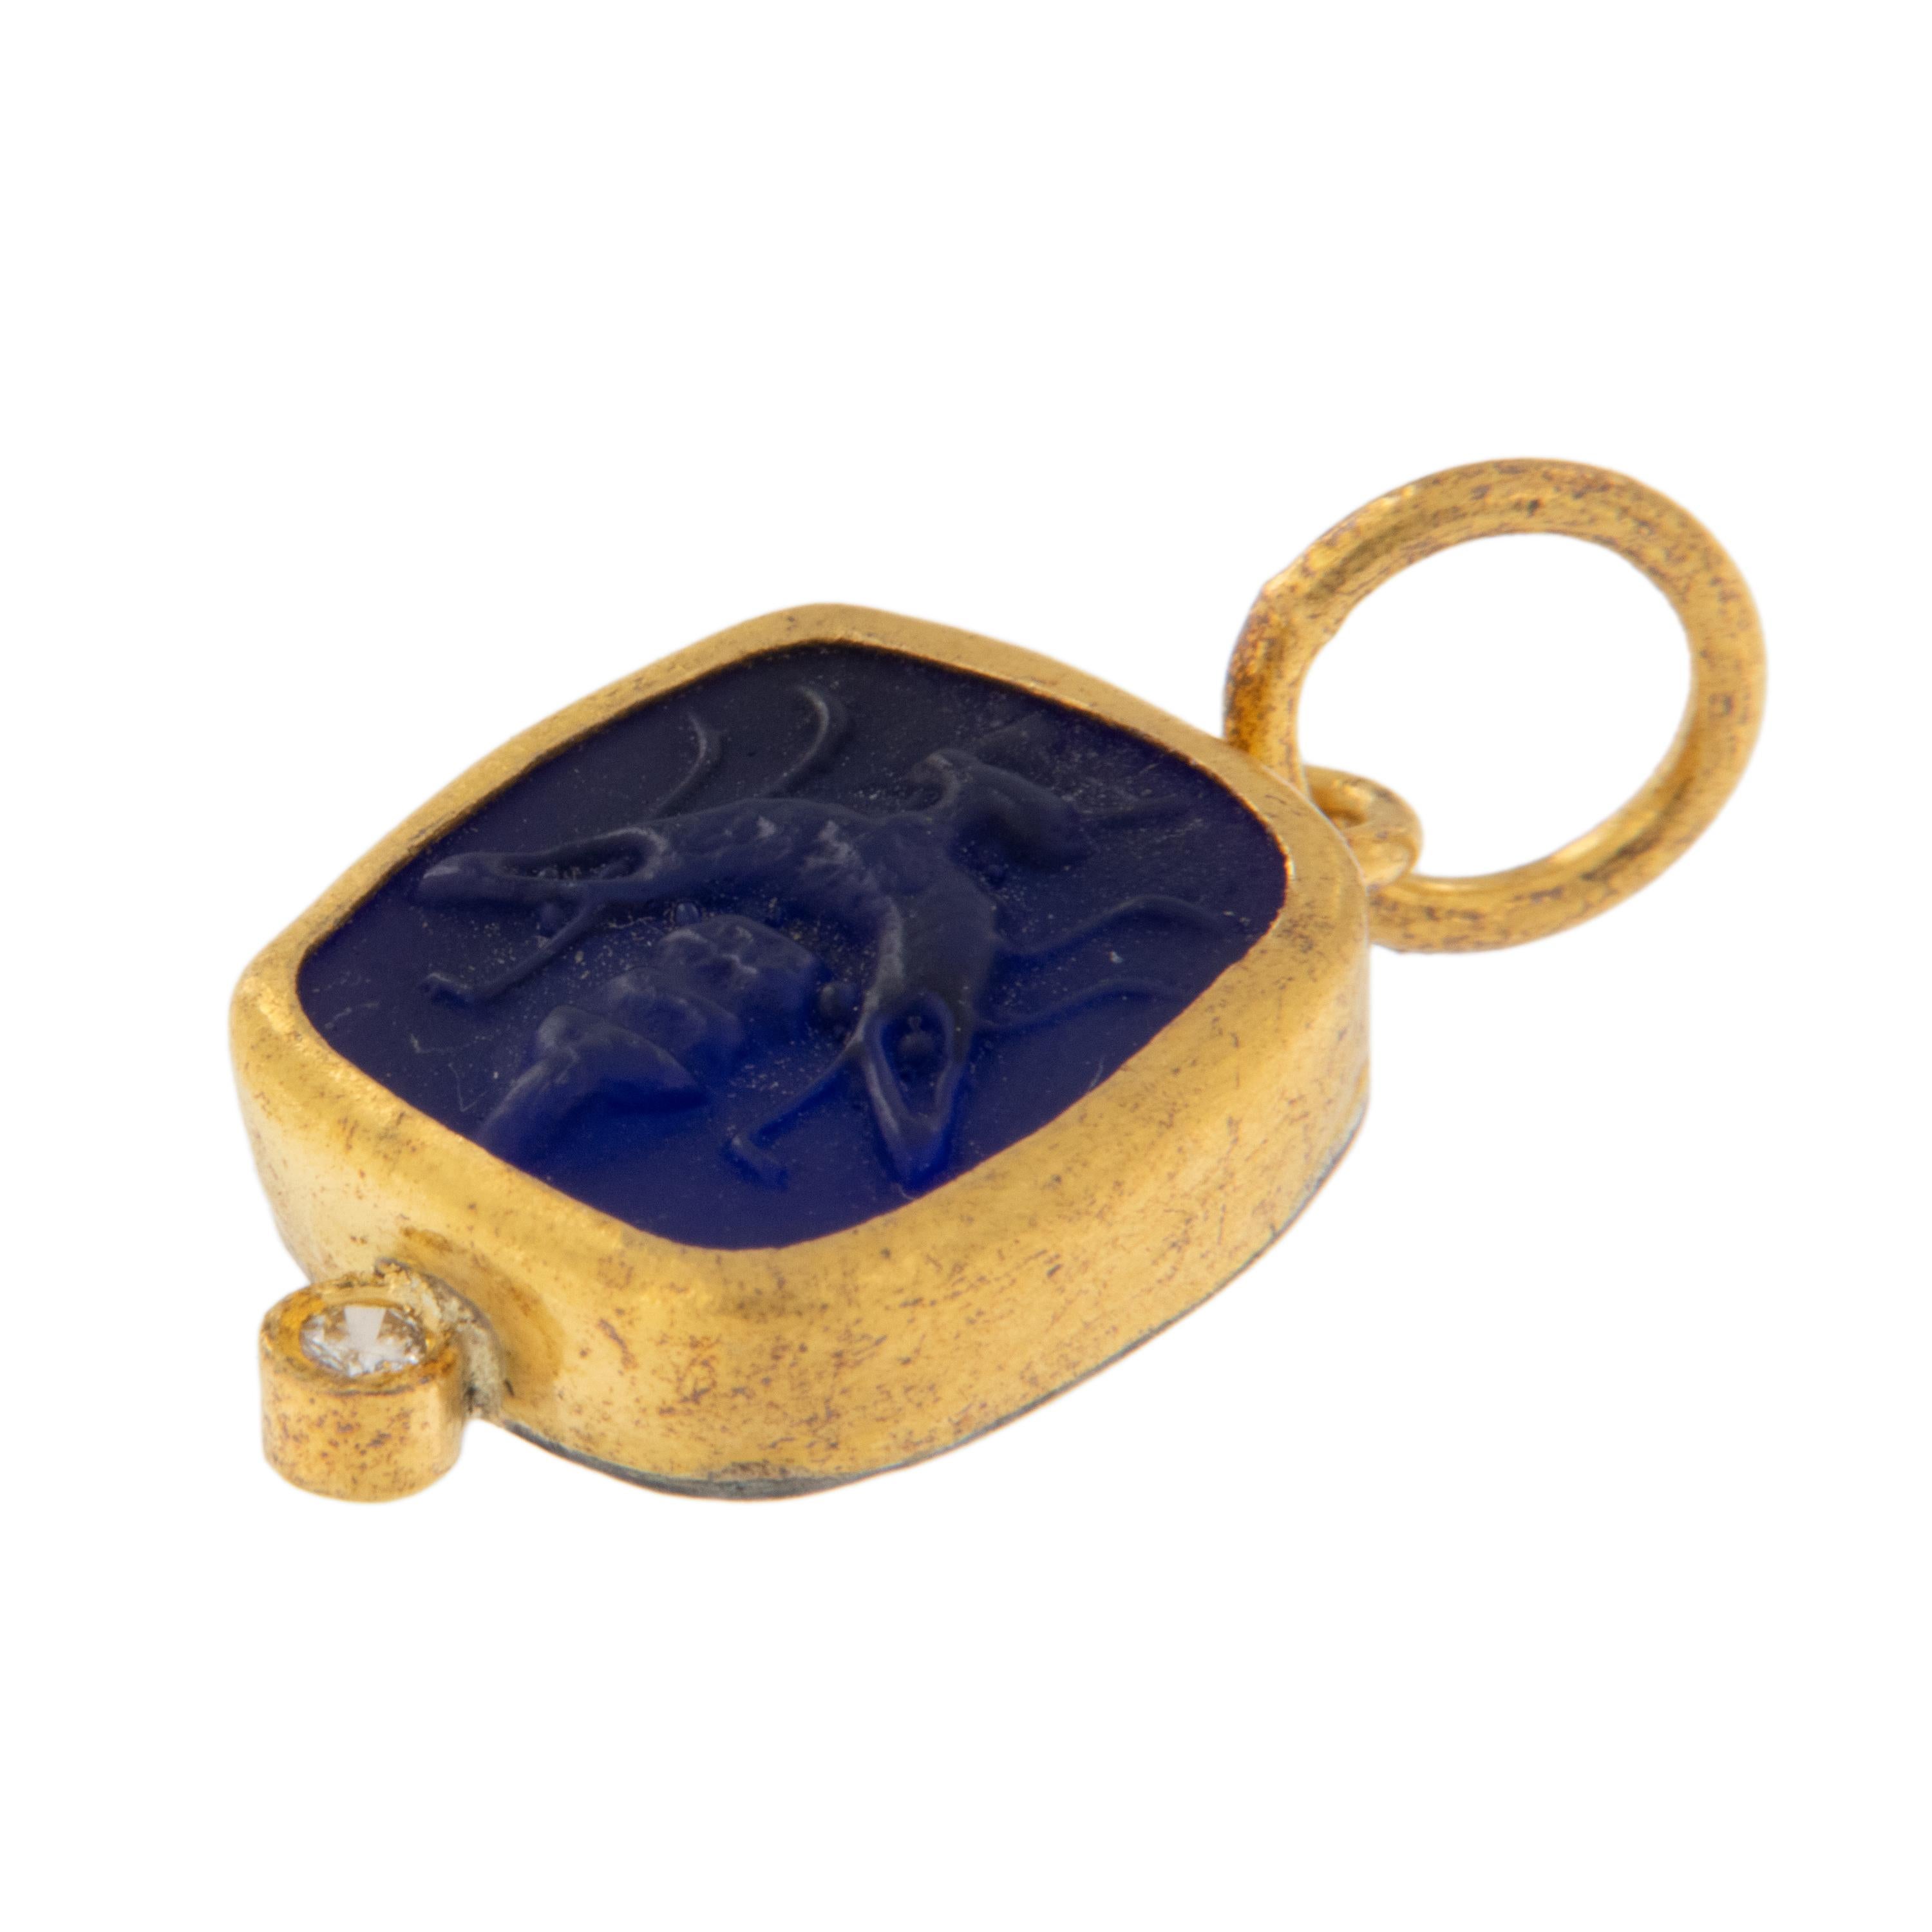 Rare 24 karat yellow gold revered by discerning investors for its purity and warmth of color is used in combination with hammered silver to make up this square blue glass bee intaglio accented with diamond, for the cutest pendant or charm. The bee,